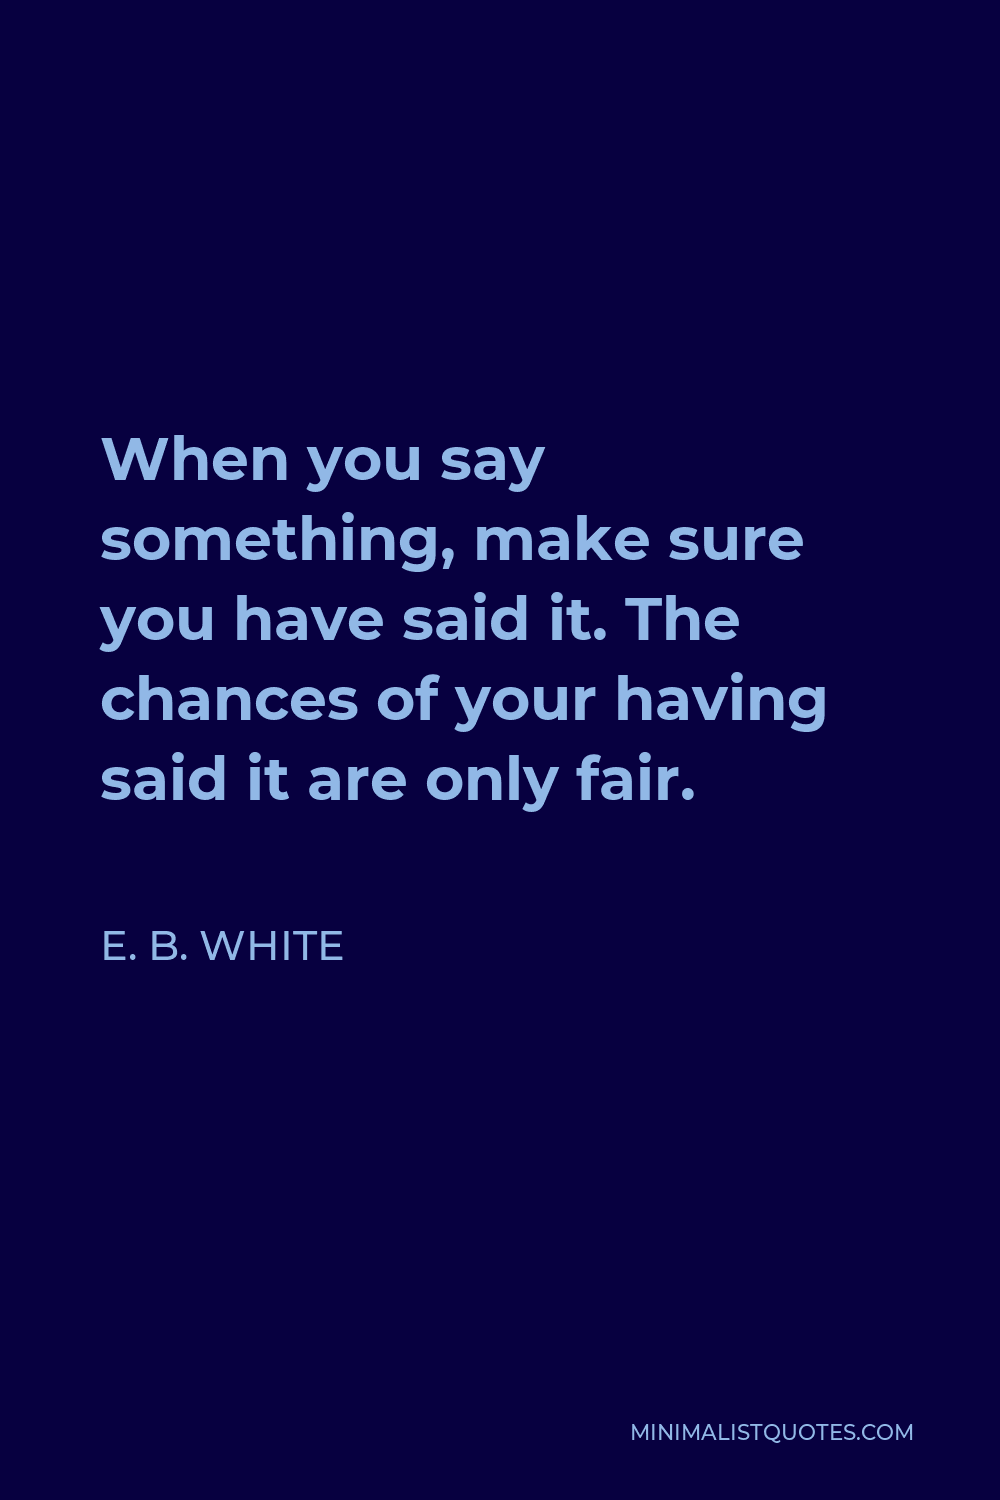 E. B. White Quote - When you say something, make sure you have said it. The chances of your having said it are only fair.